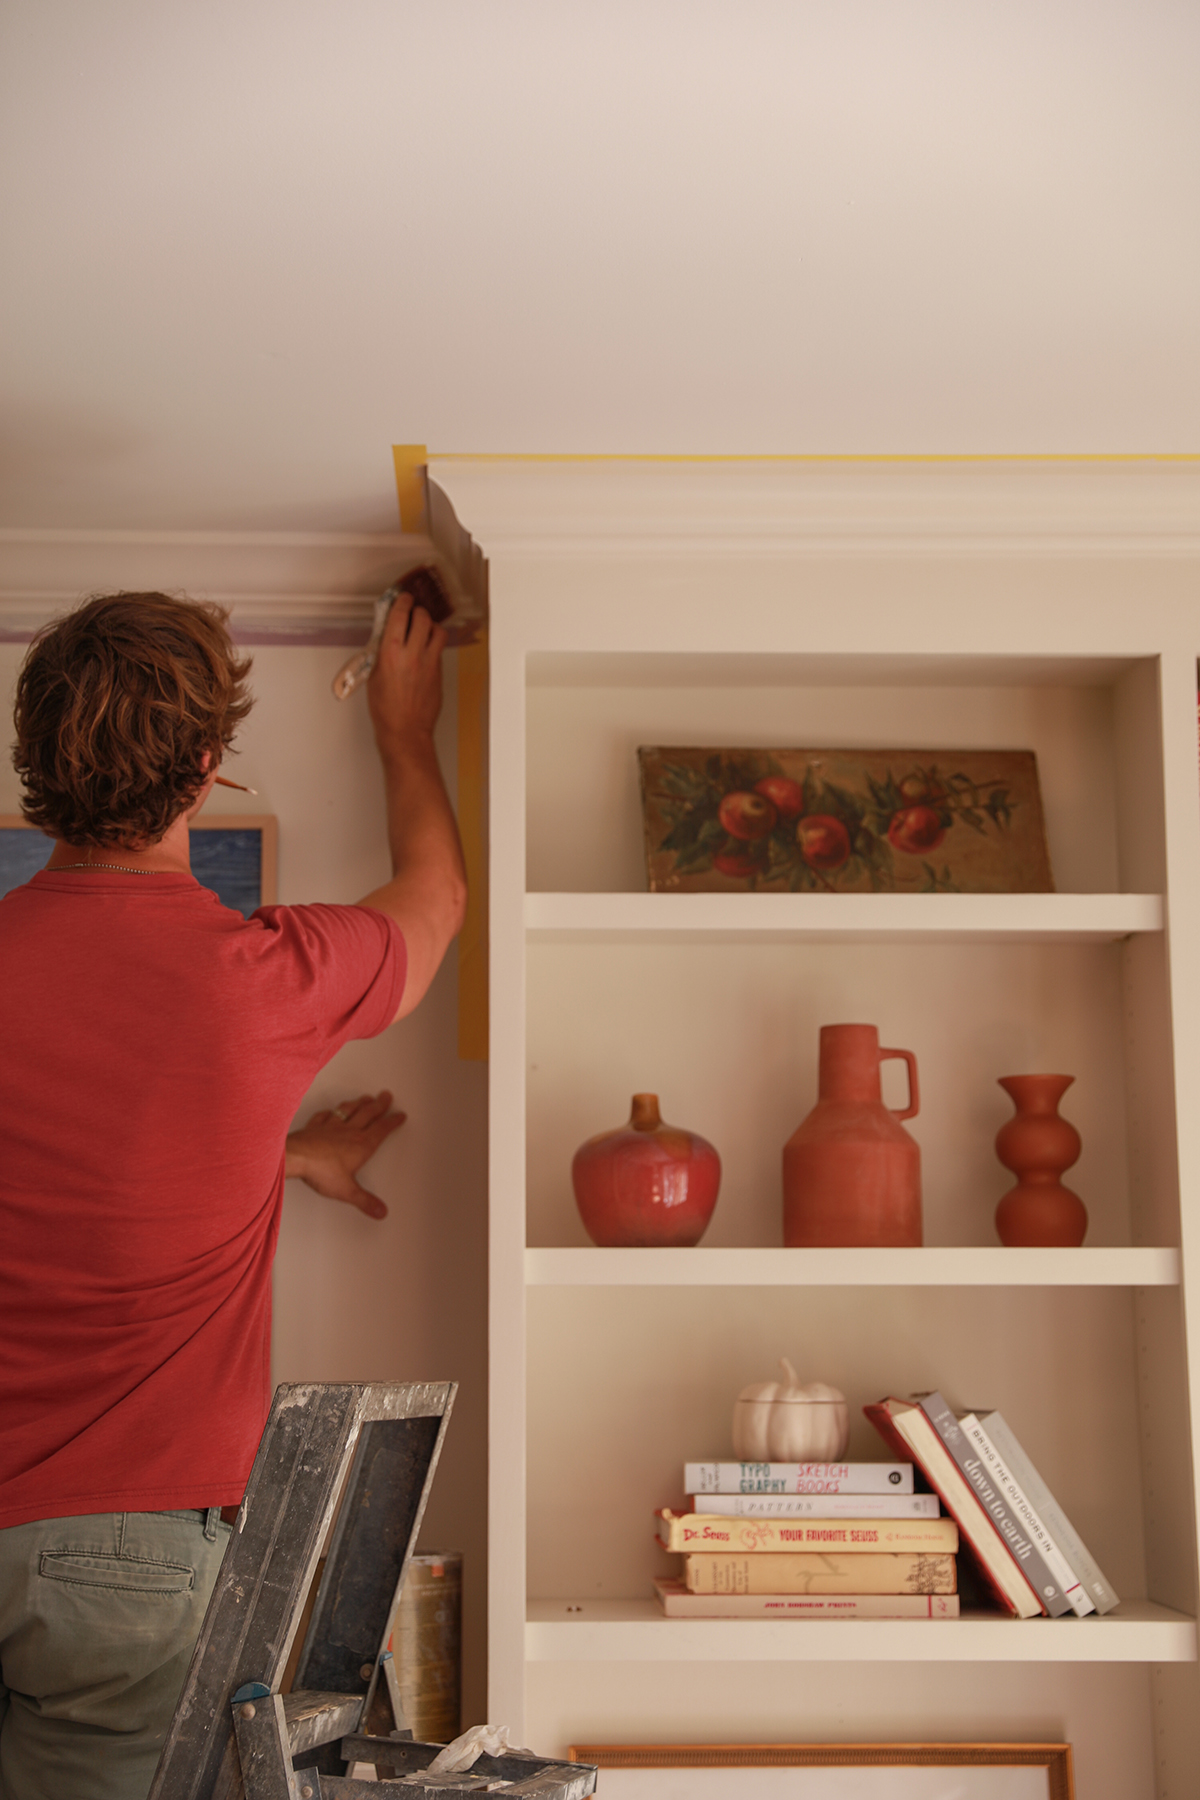 painting crown molding